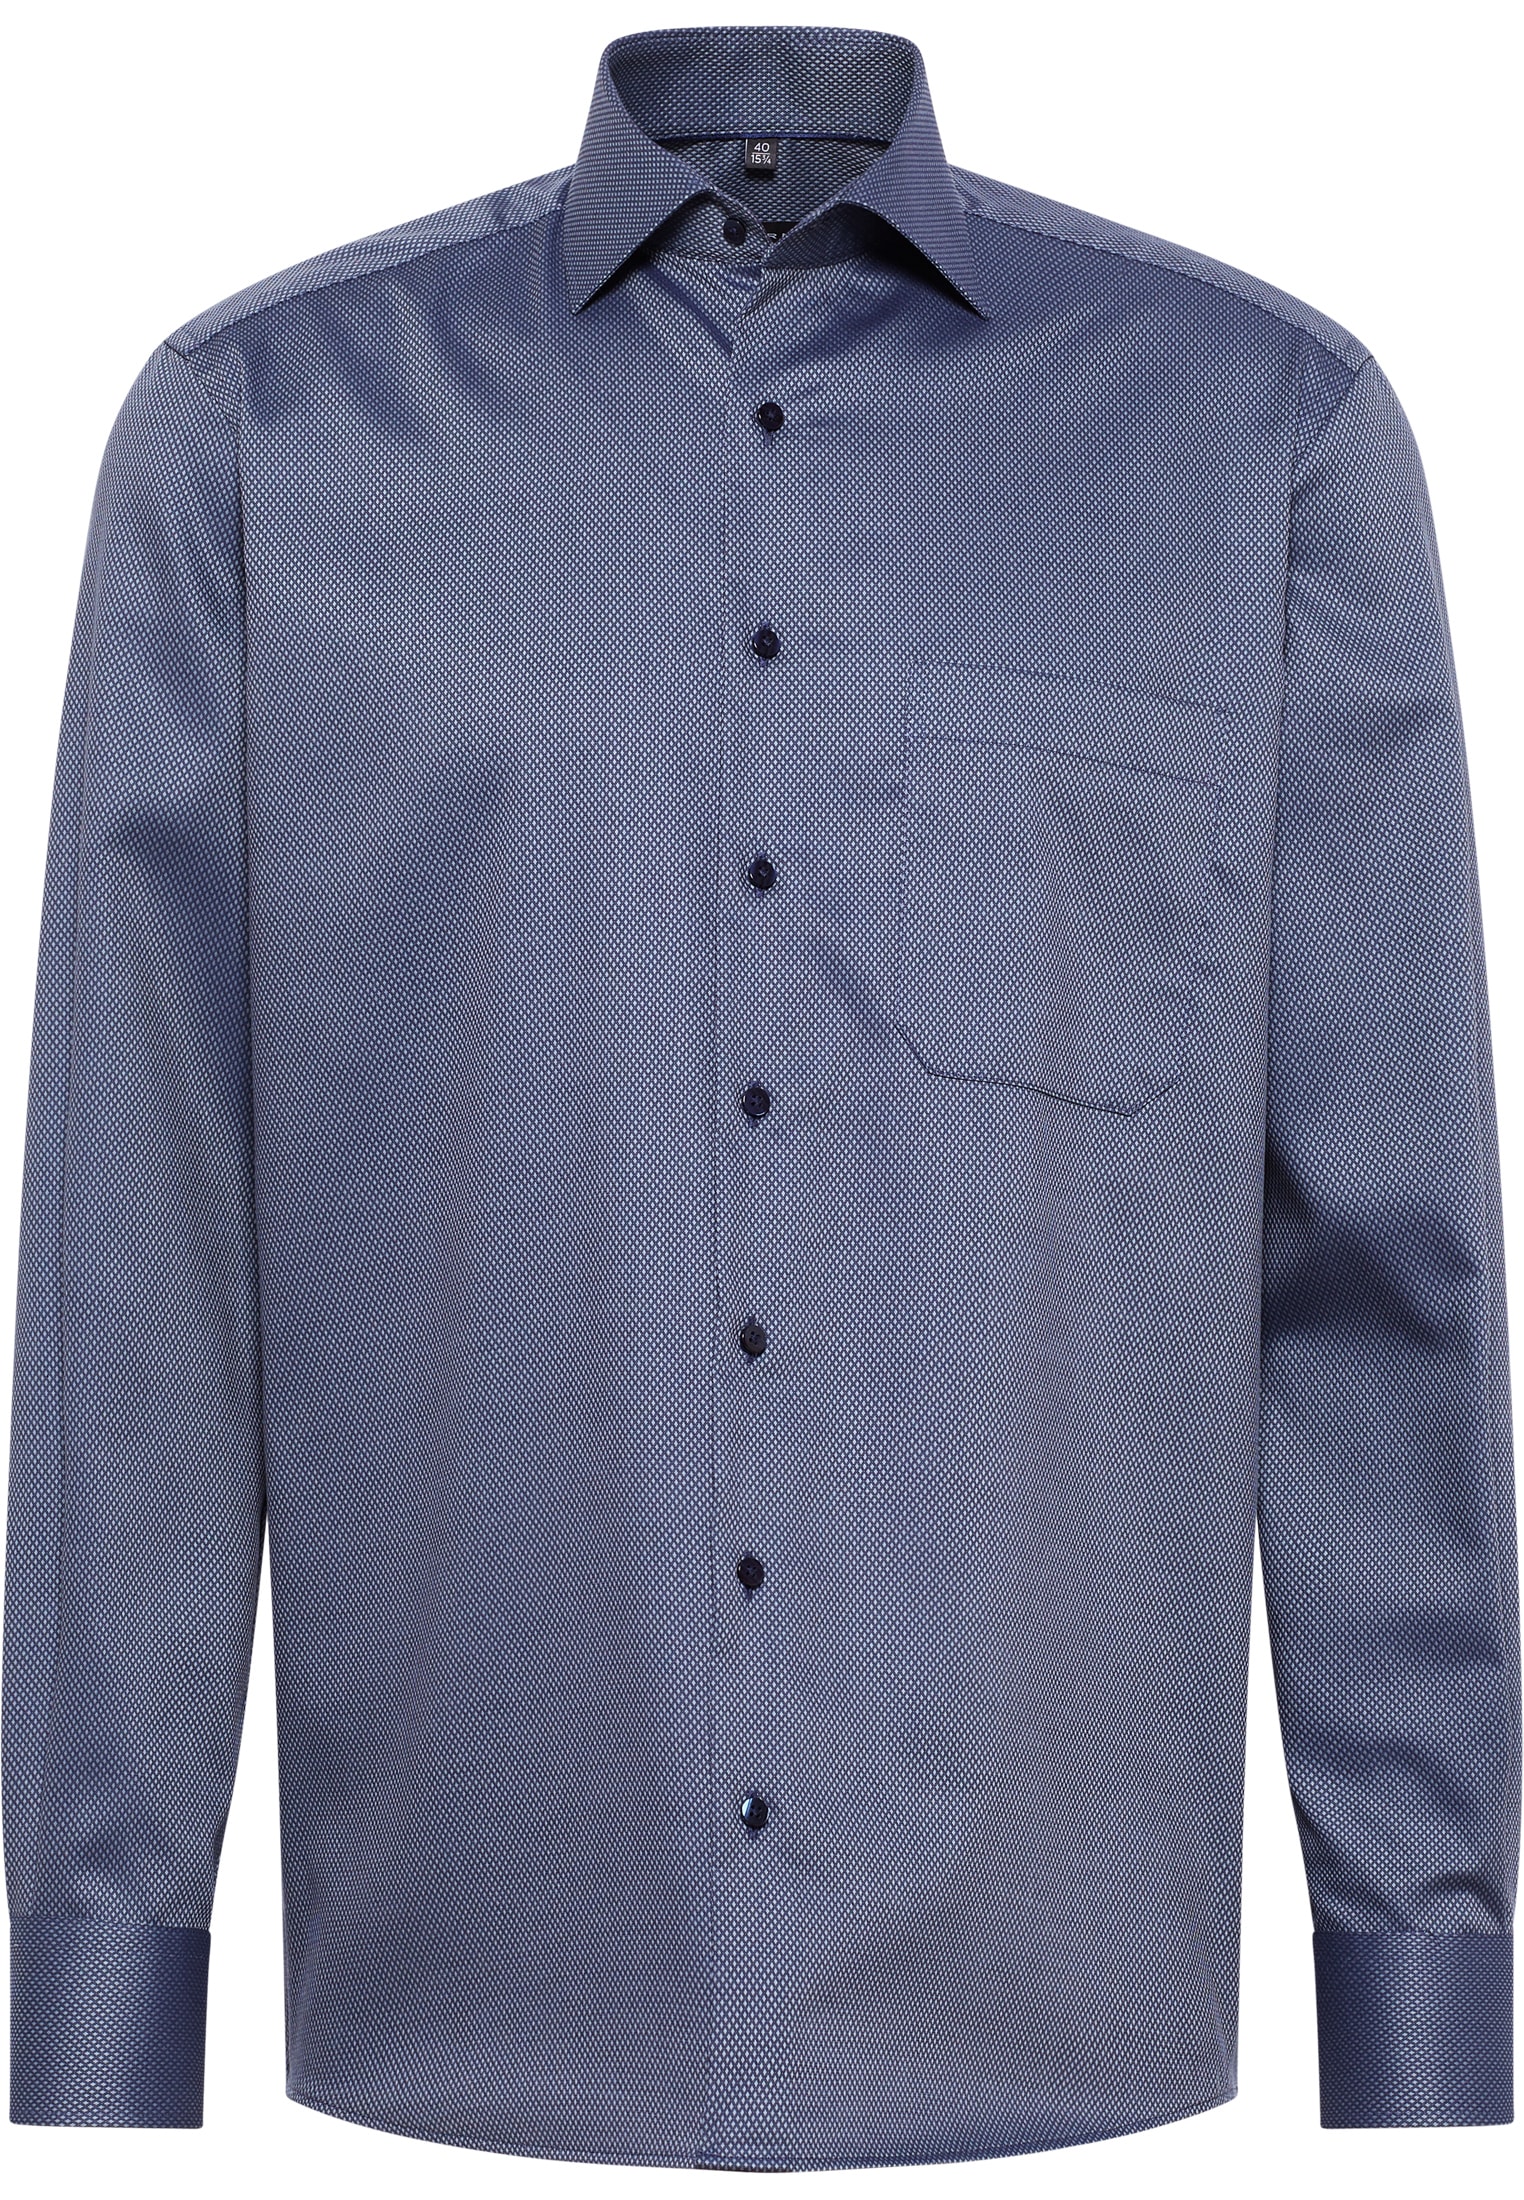 COMFORT FIT Shirt in steel grey structured